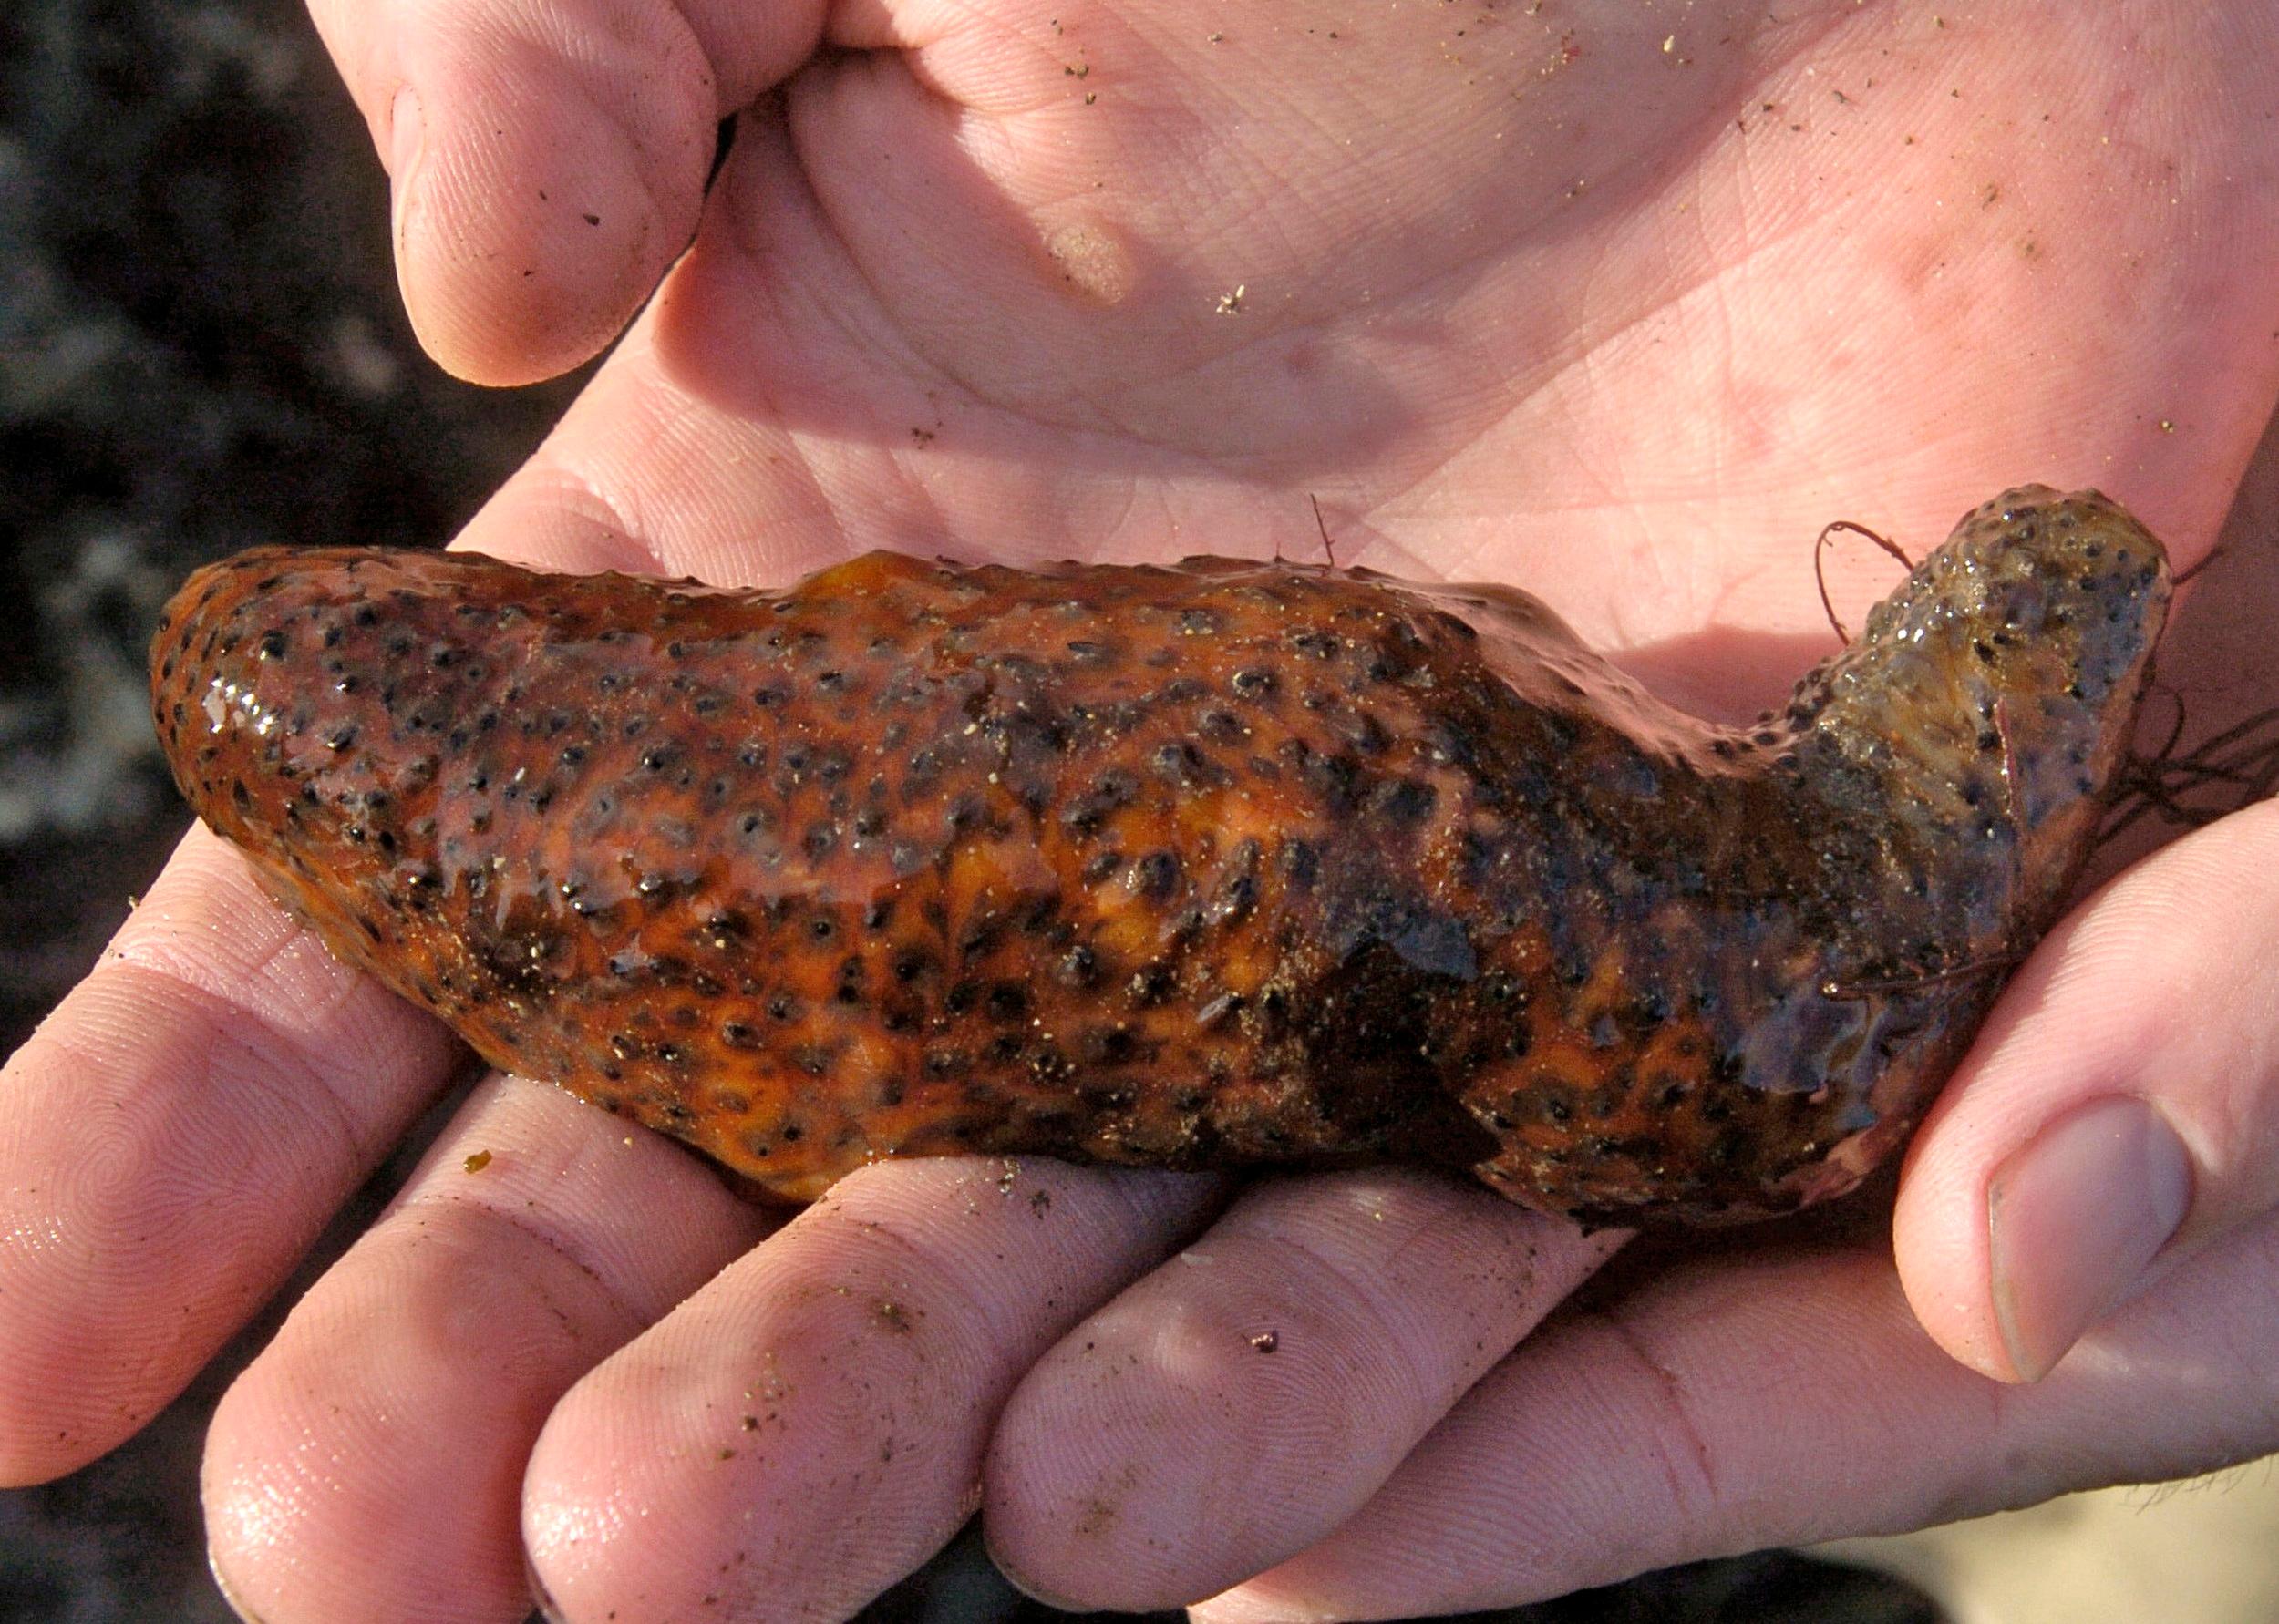 Traffickers Plead Guilty to Smuggling Over $10,000 in Endangered Sea Cucumbers